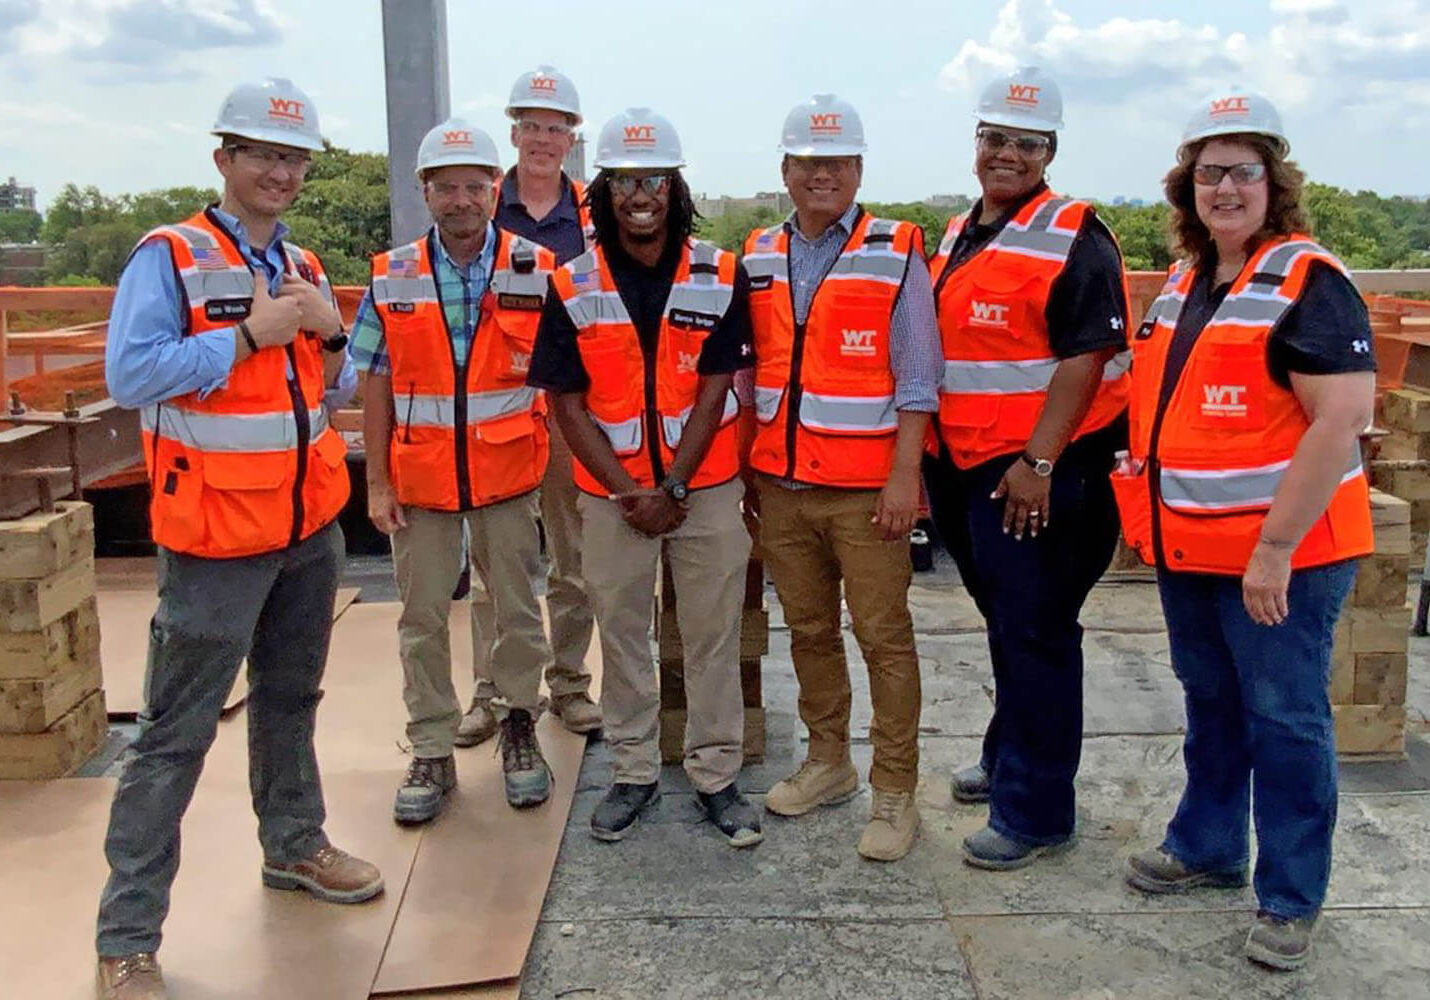 A group of educators participating in the Maryland Chamber Foundation's Teacher Externship Program alongside employees from their host company, Whiting-Turner, standing in a group at a construction site with safety equipment on.